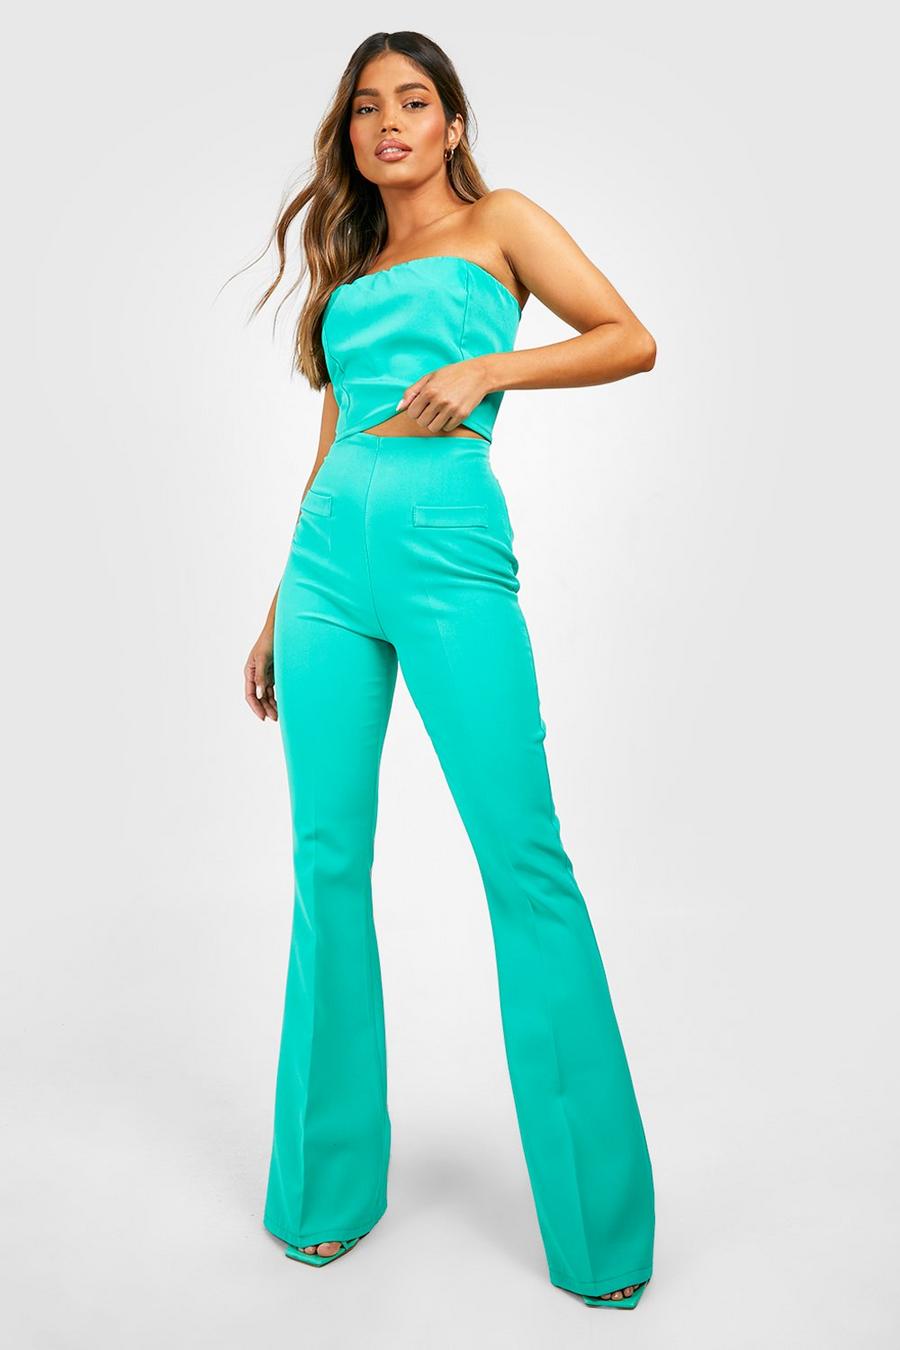 Emerald green Seam Detail Fit & Flare Pants